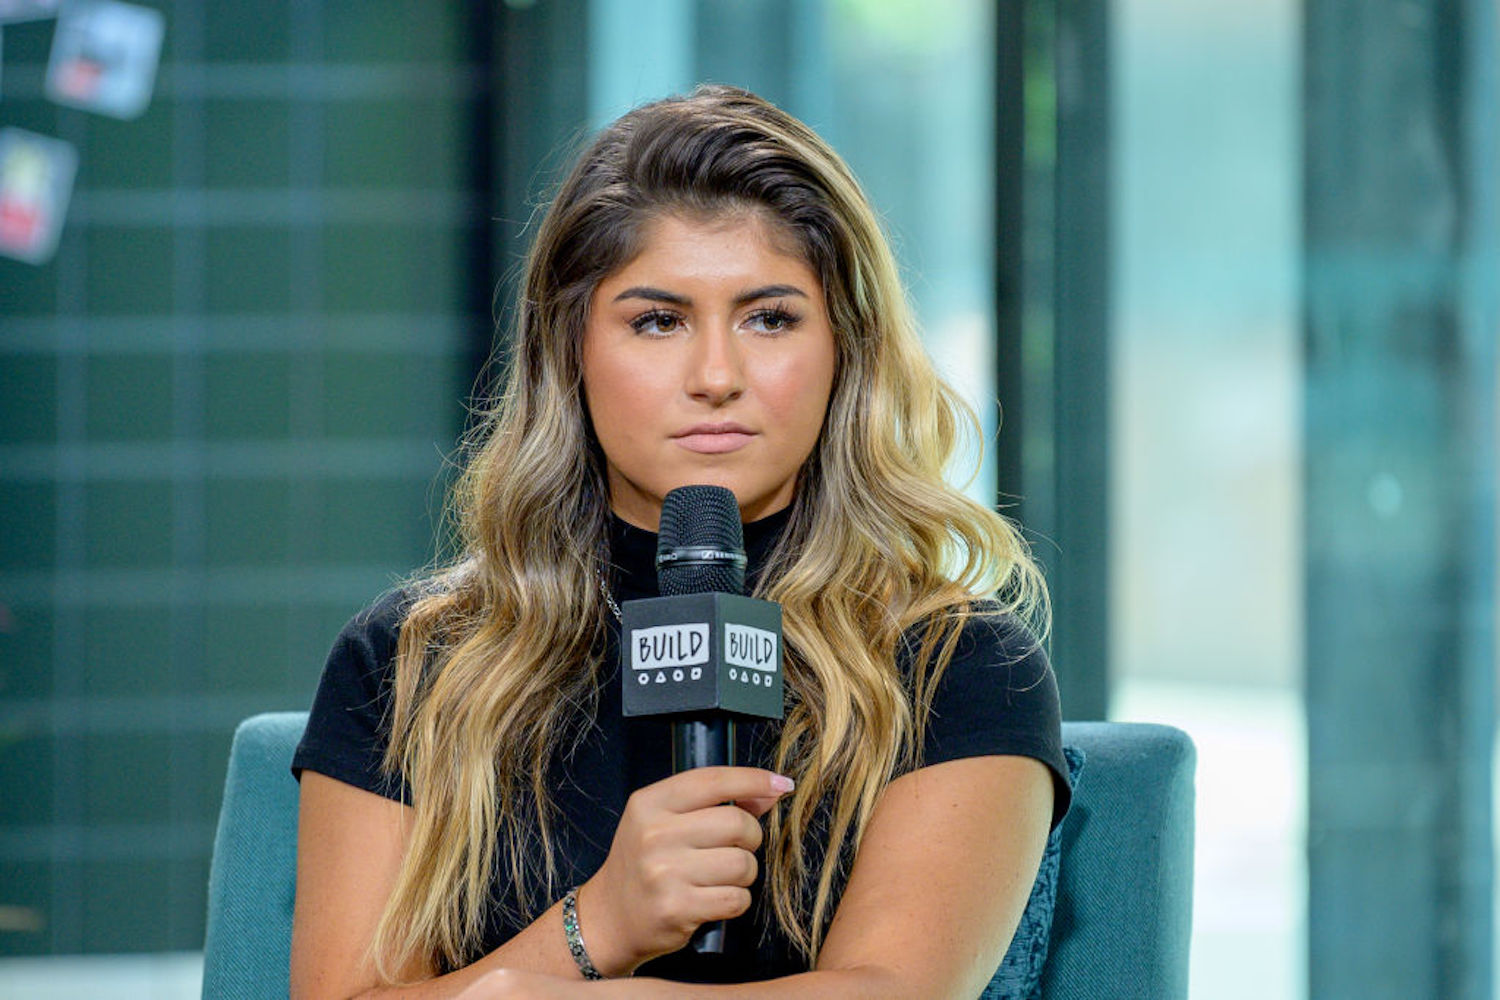 Hailie Deegan is a promising talent in NASCAR at 19 years old, but her career just hit a snag after she was caught uttering an offensive slur.